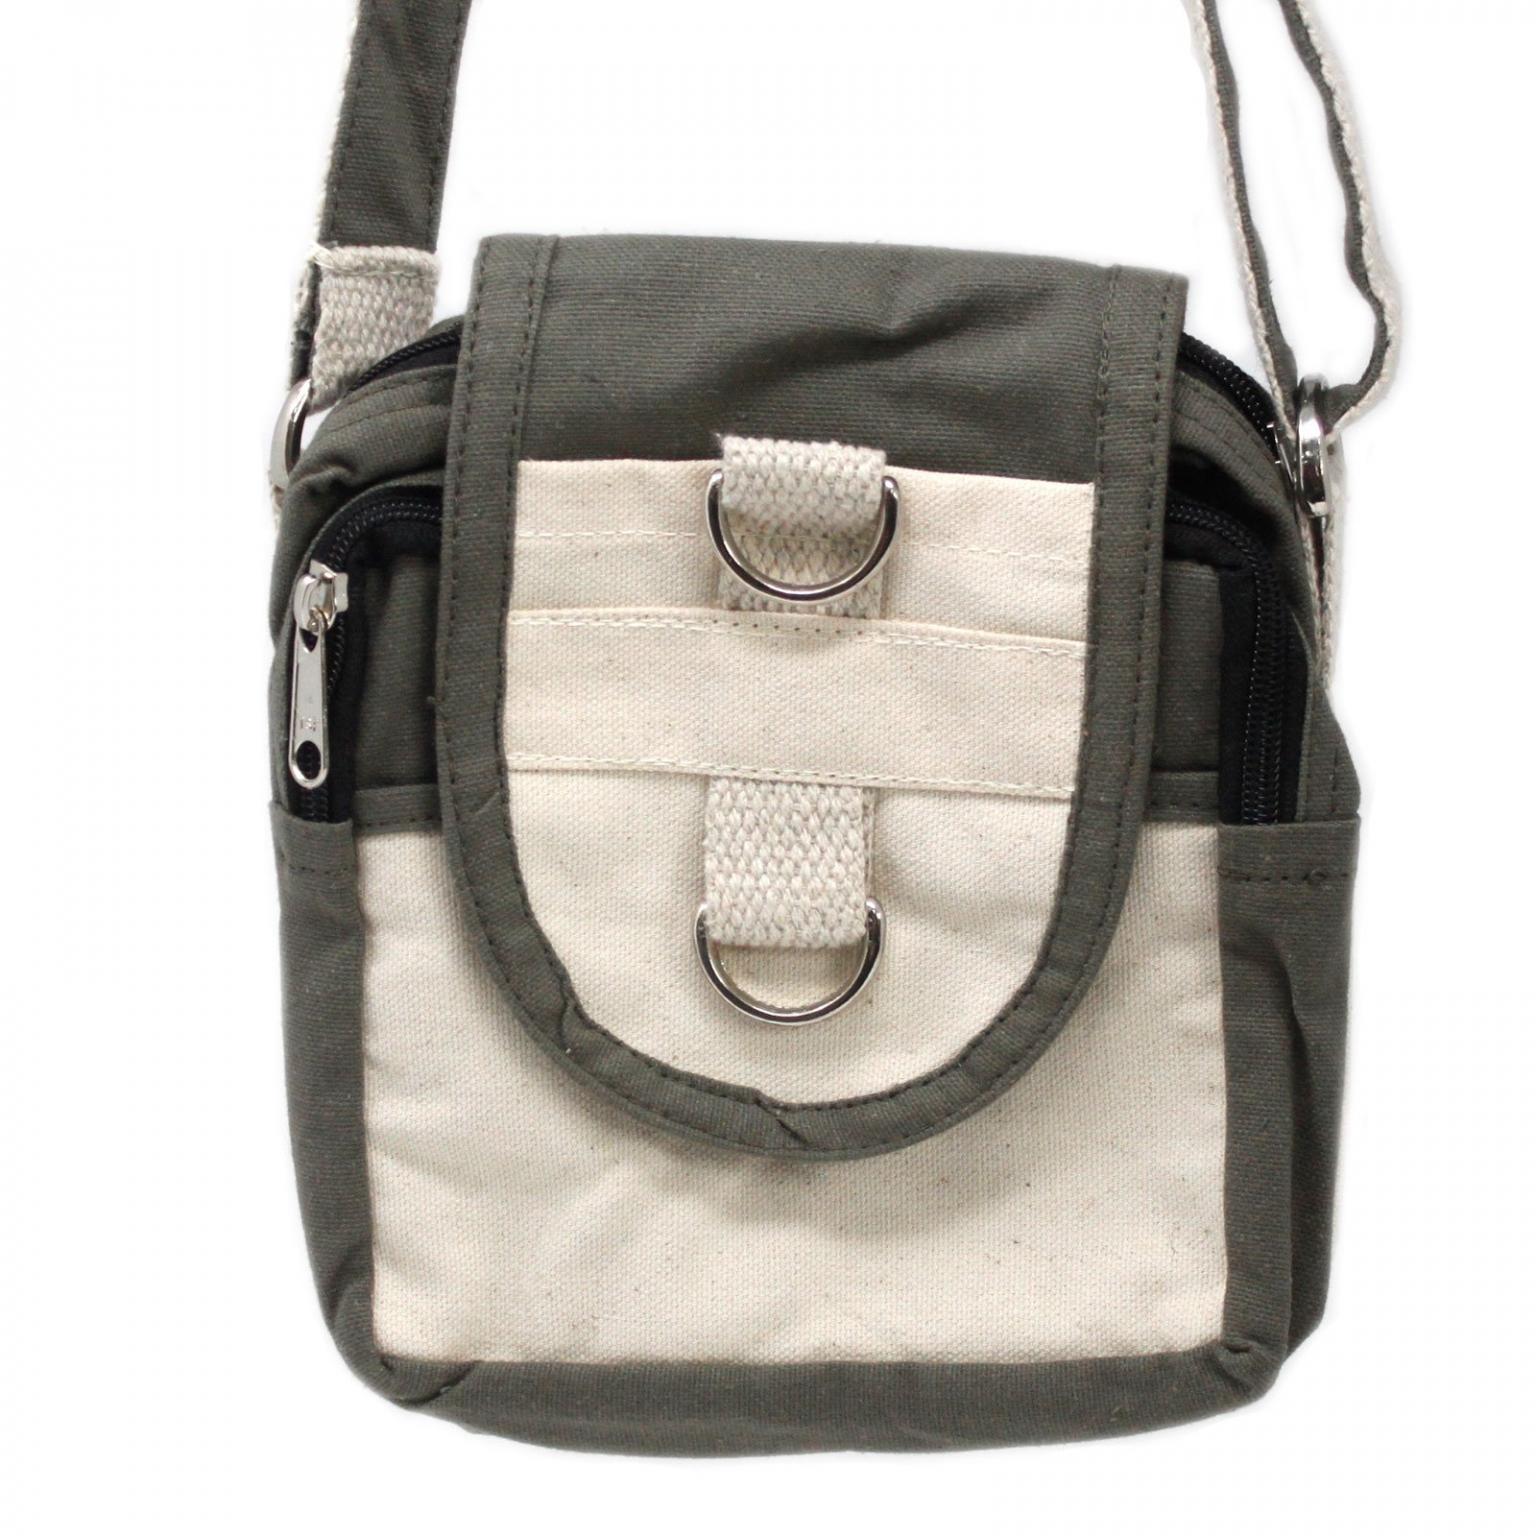 Charcoal Natural Cotton Canvas Travel Bag in SS9 Sea for £15.00 for sale | Shpock